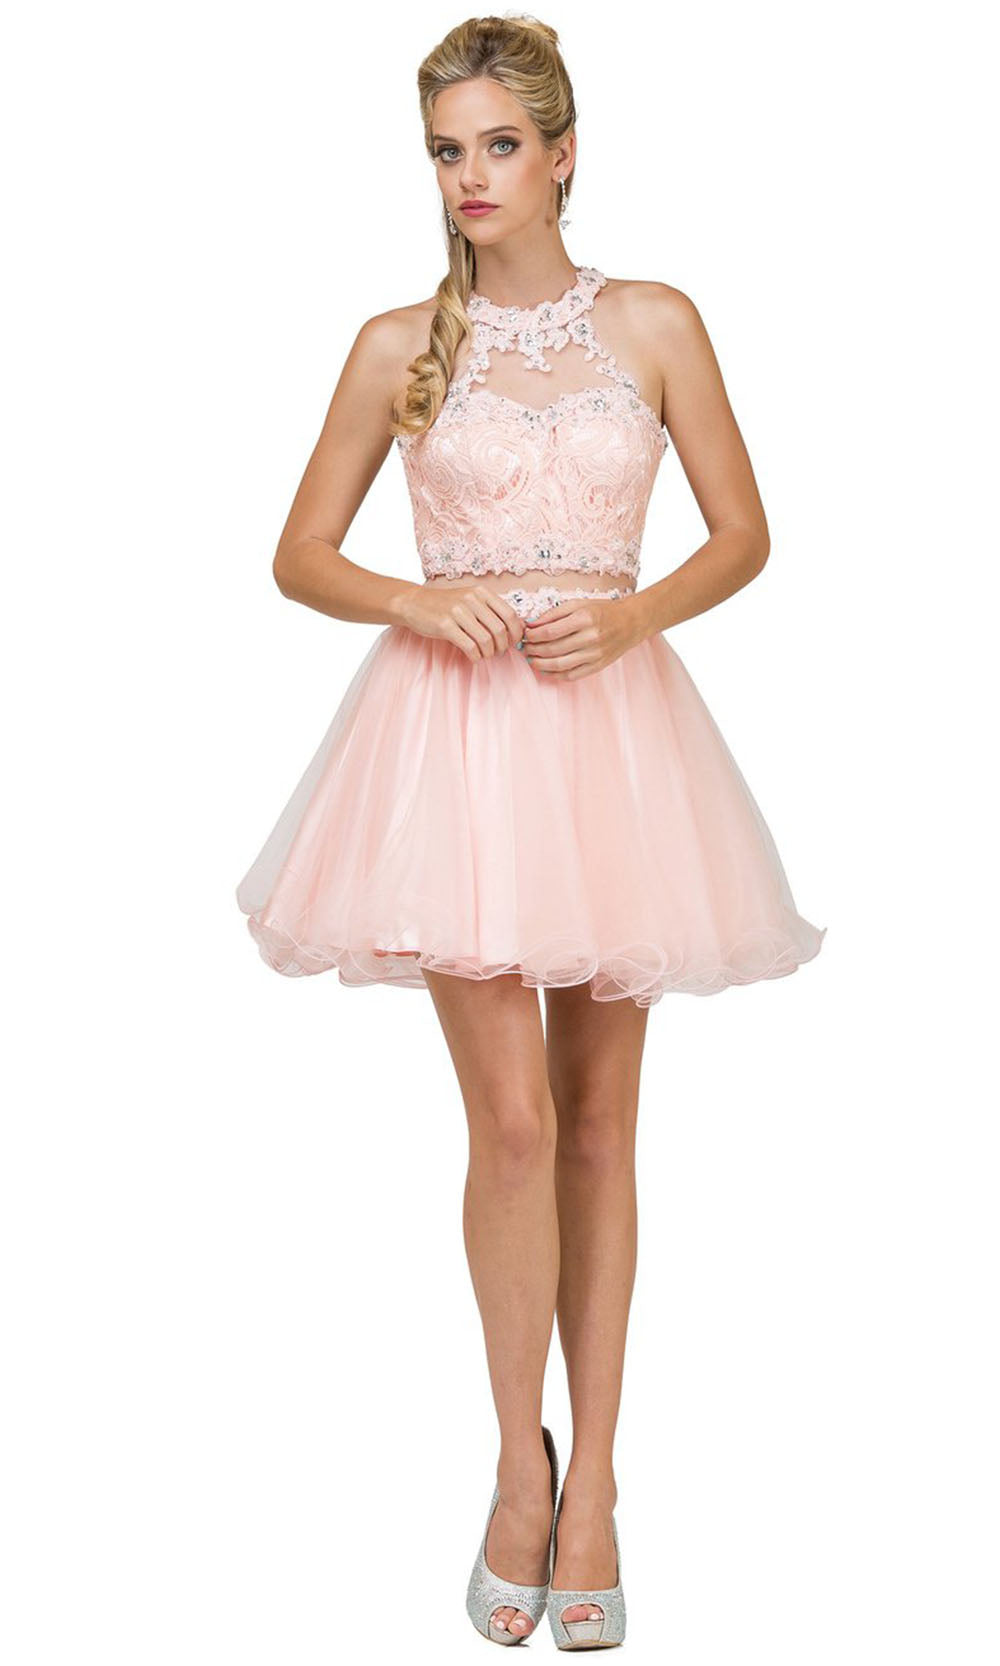 Dancing Queen - 9631 Illusion Two-Piece Fit And Flare Cocktail Dress In Pinkgrade 8 grad dresses, graduation dresses